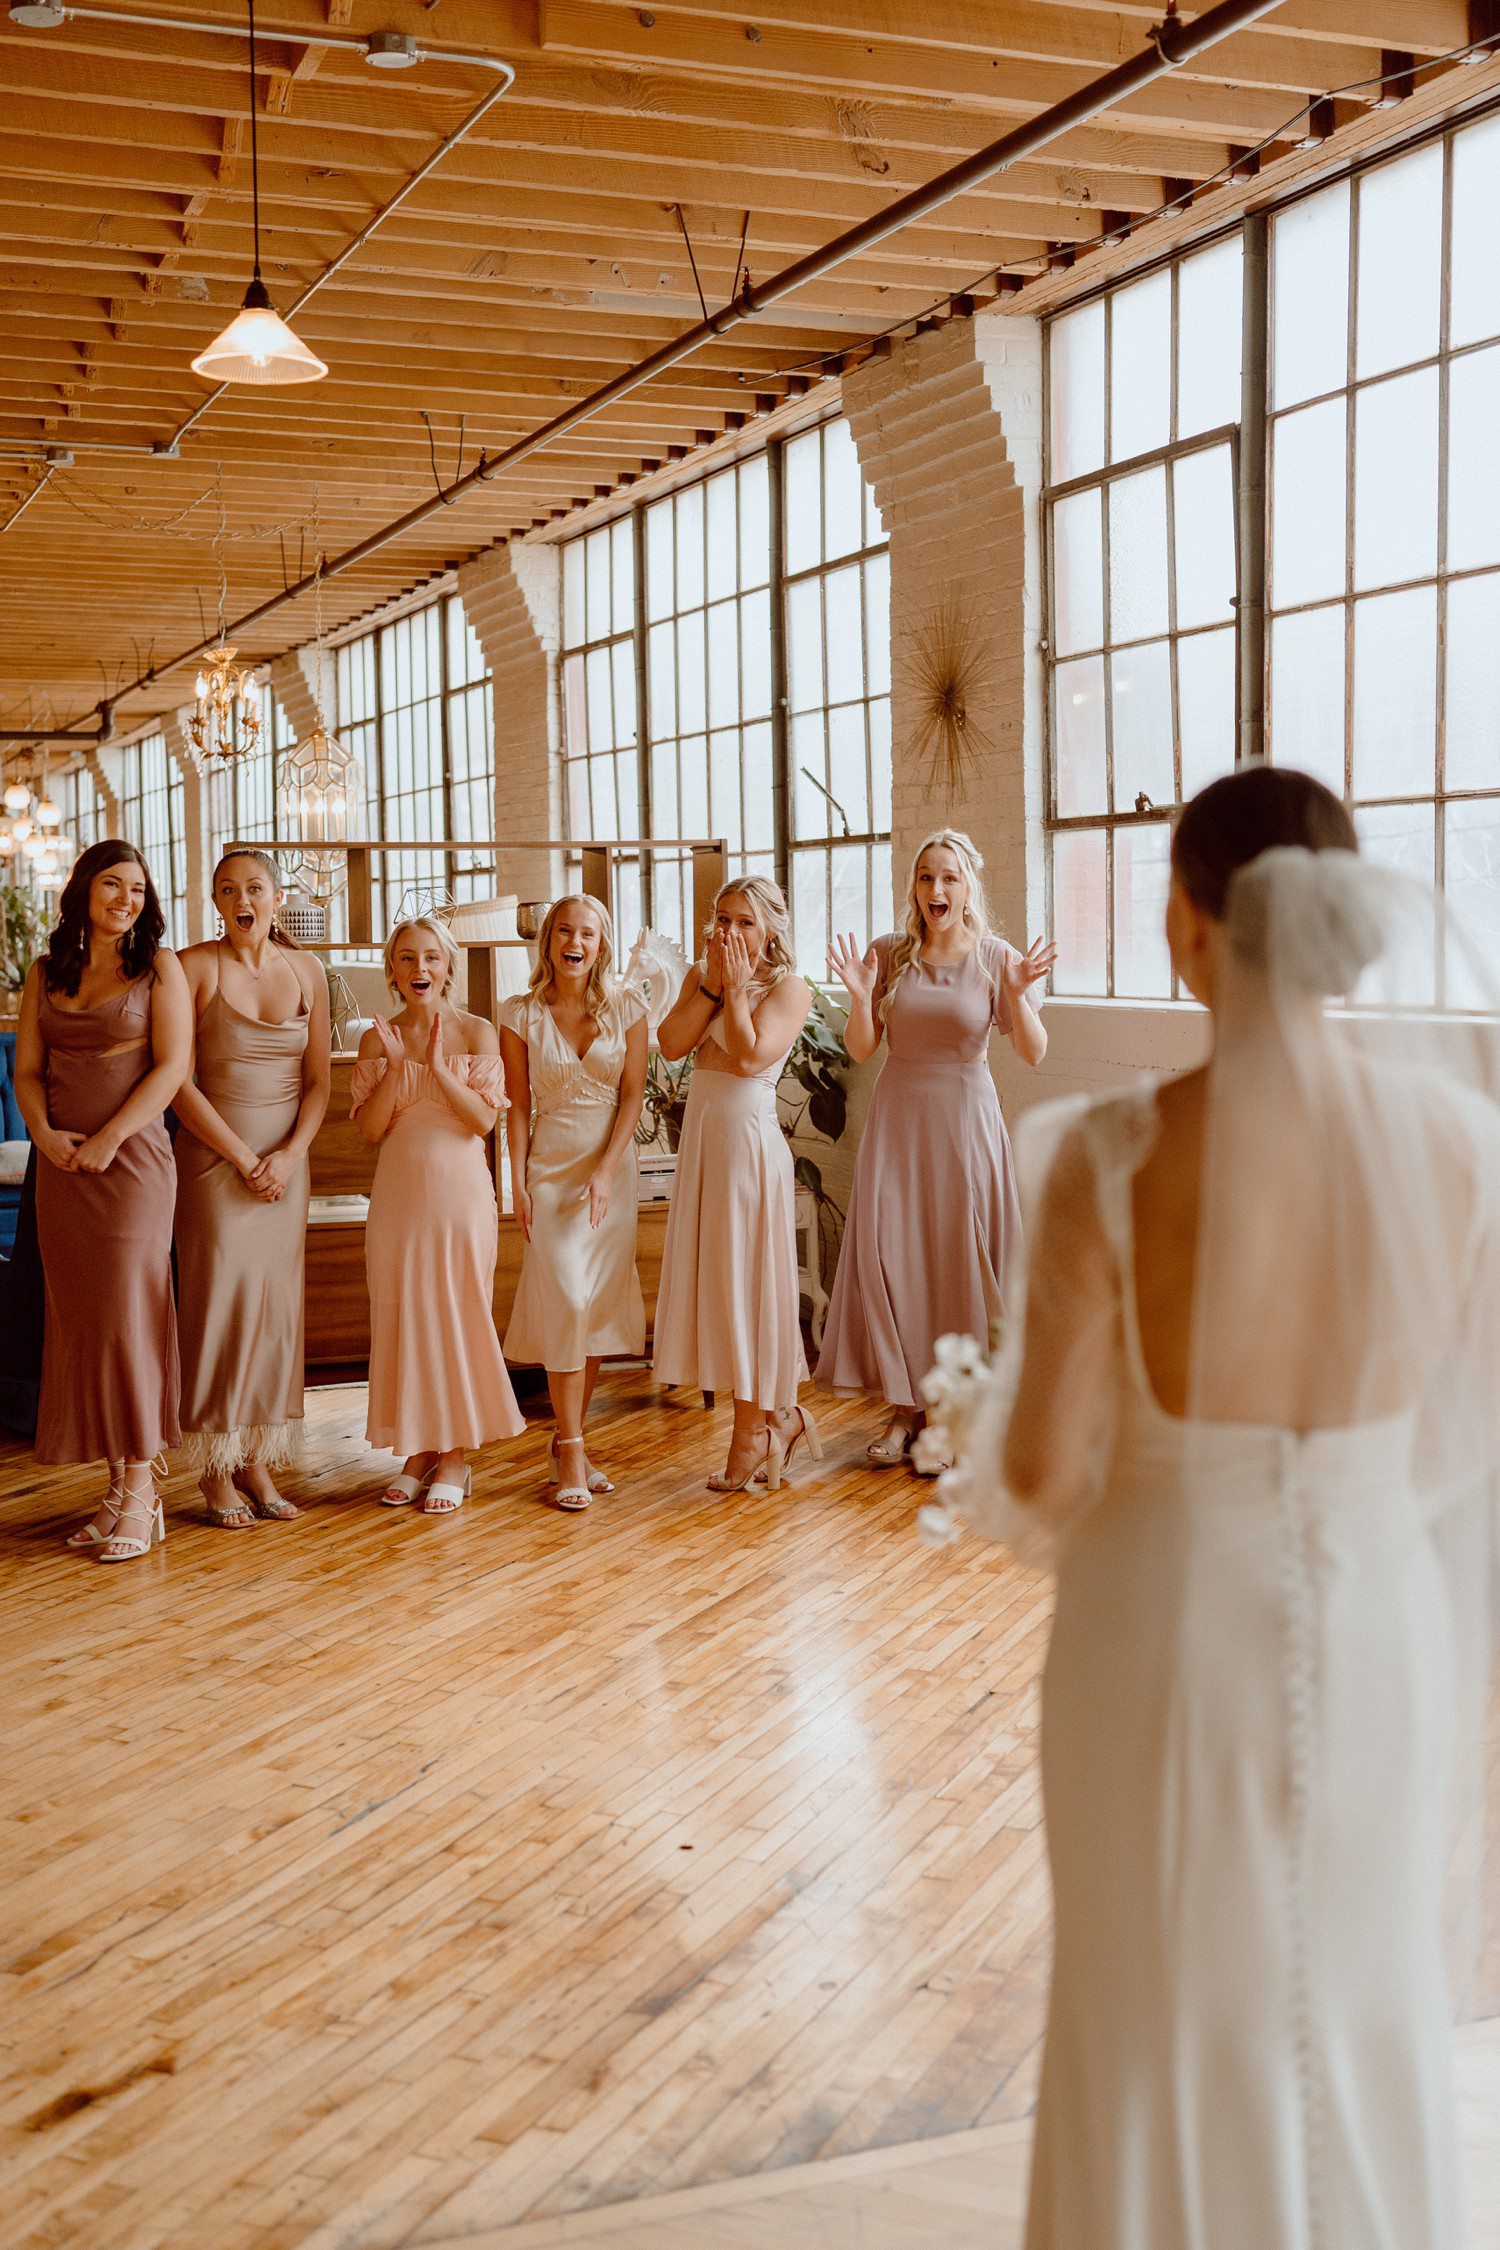 Bride First Look with Bridesmaids